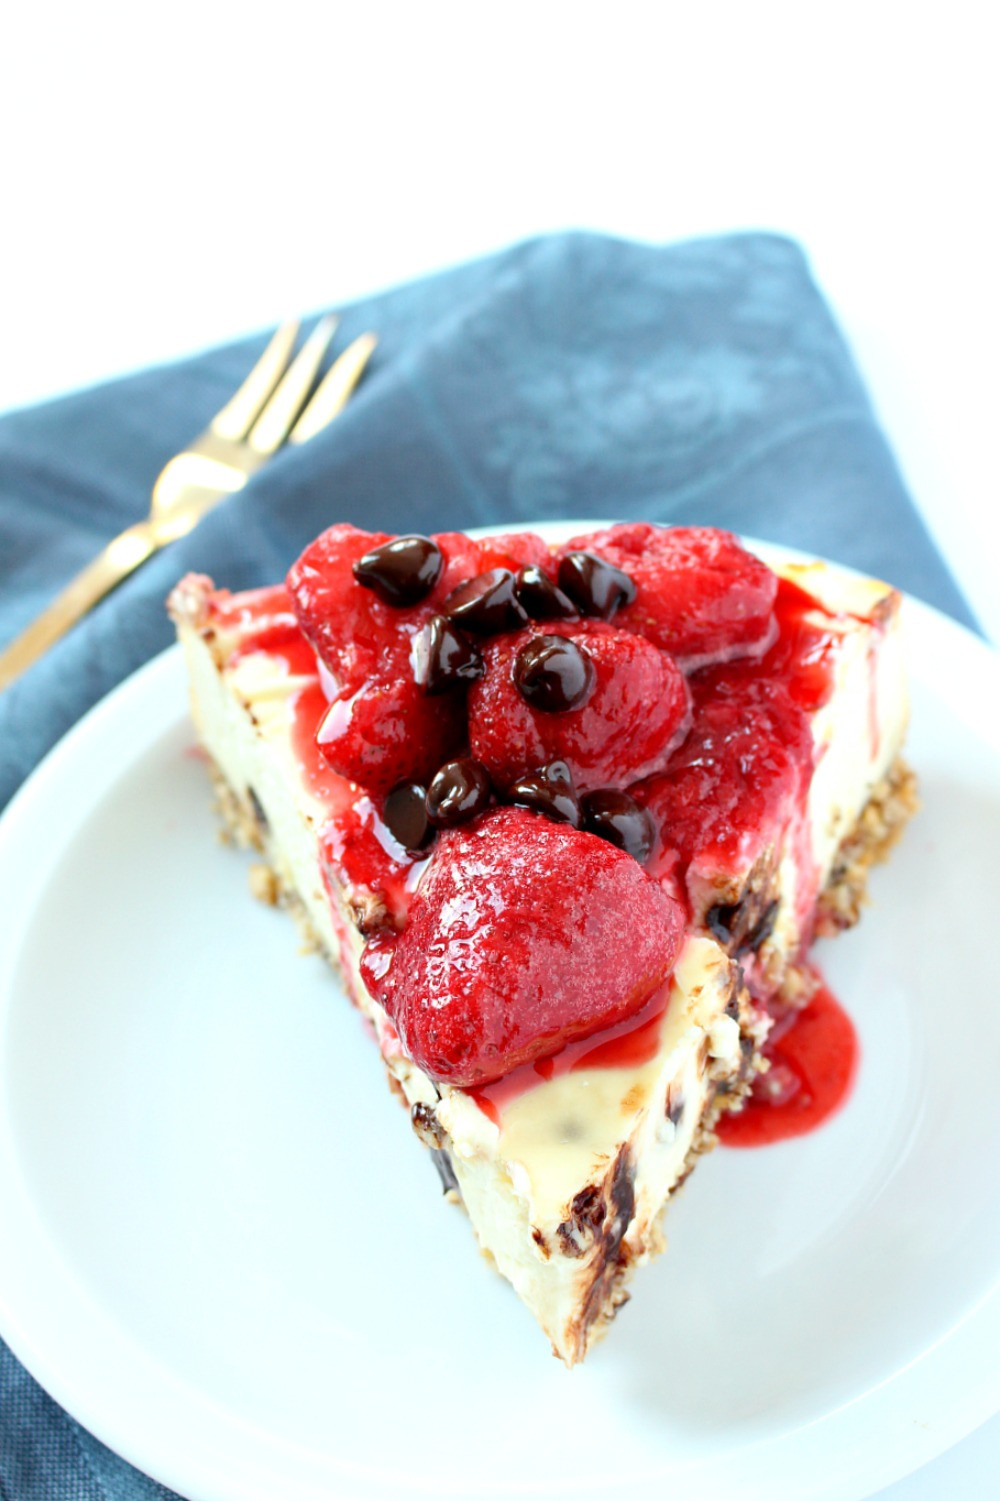 Store Bought Desserts For Diabetics
 Diabetic Friendly Chocolate Chip Cheesecake Recipe